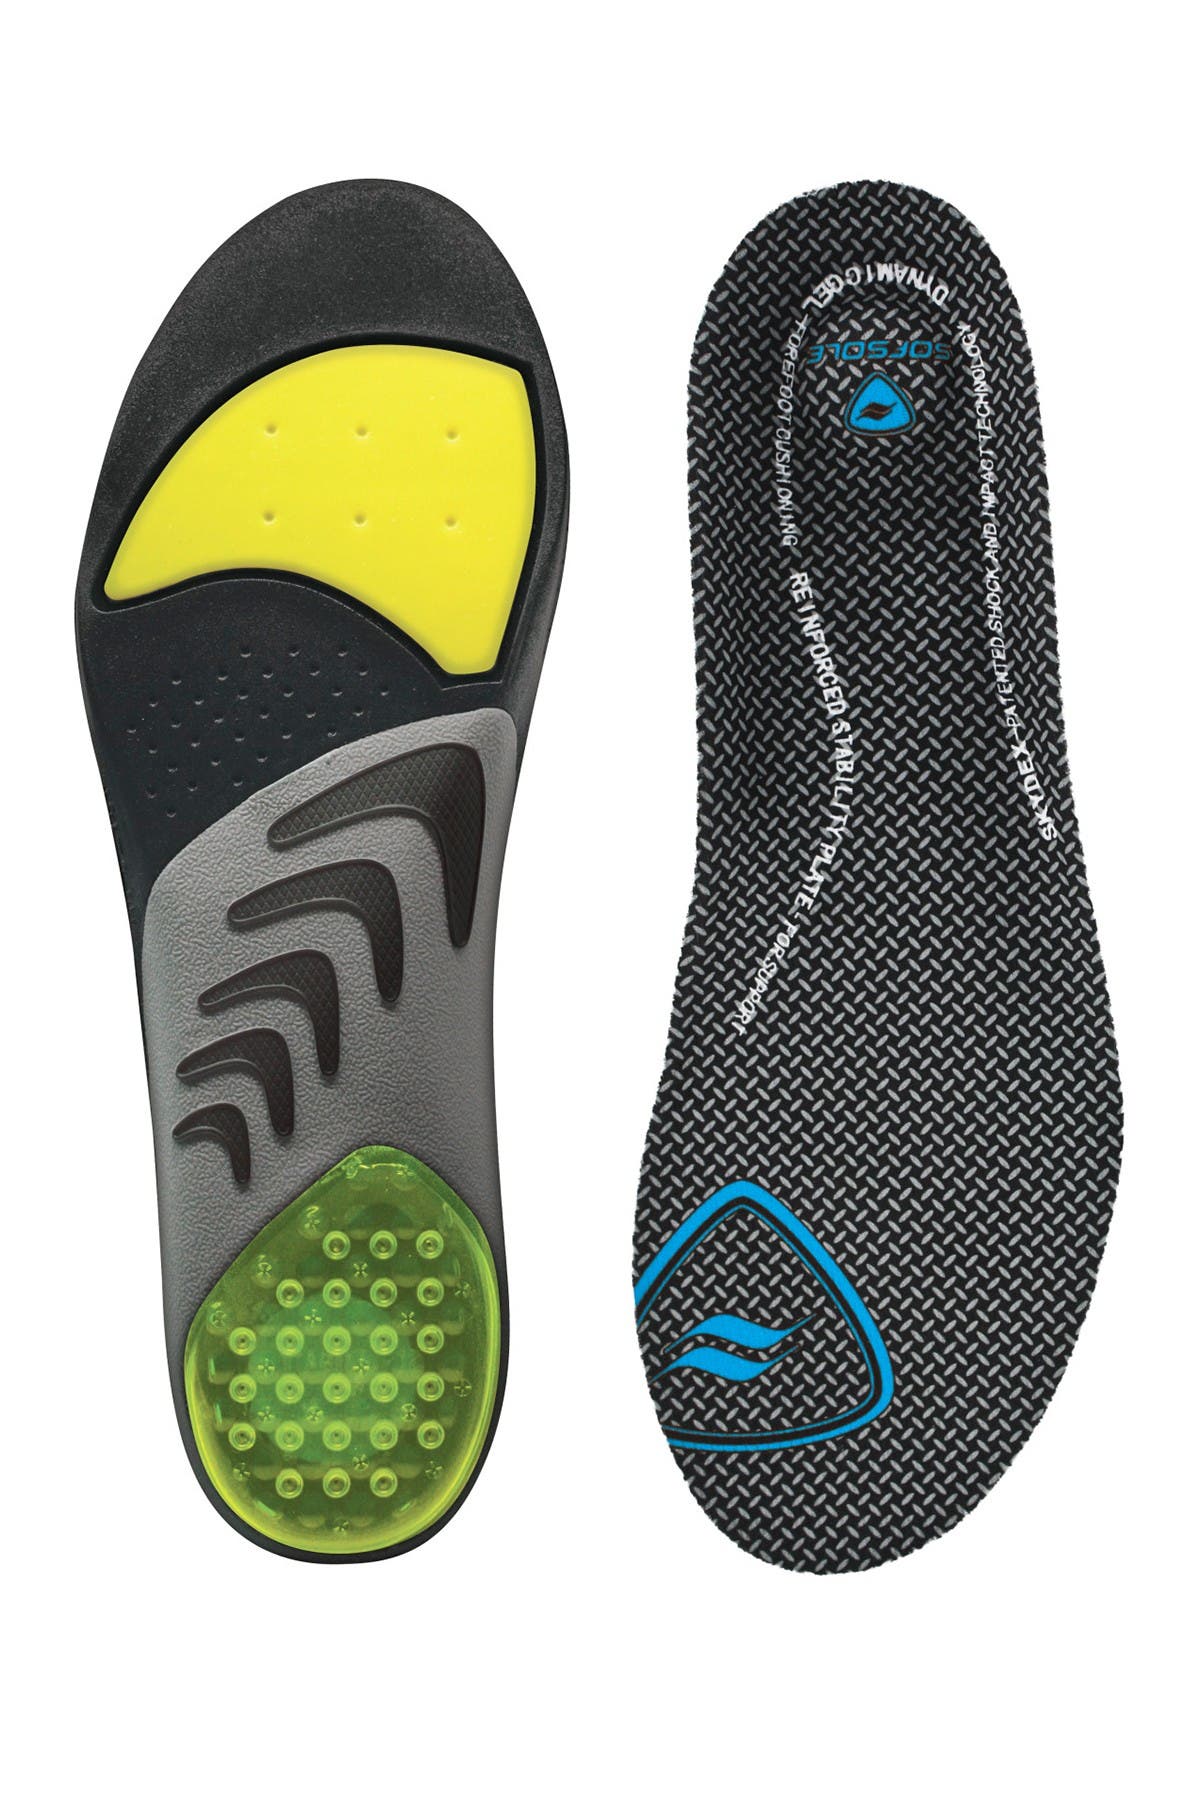 airr orthotic insole